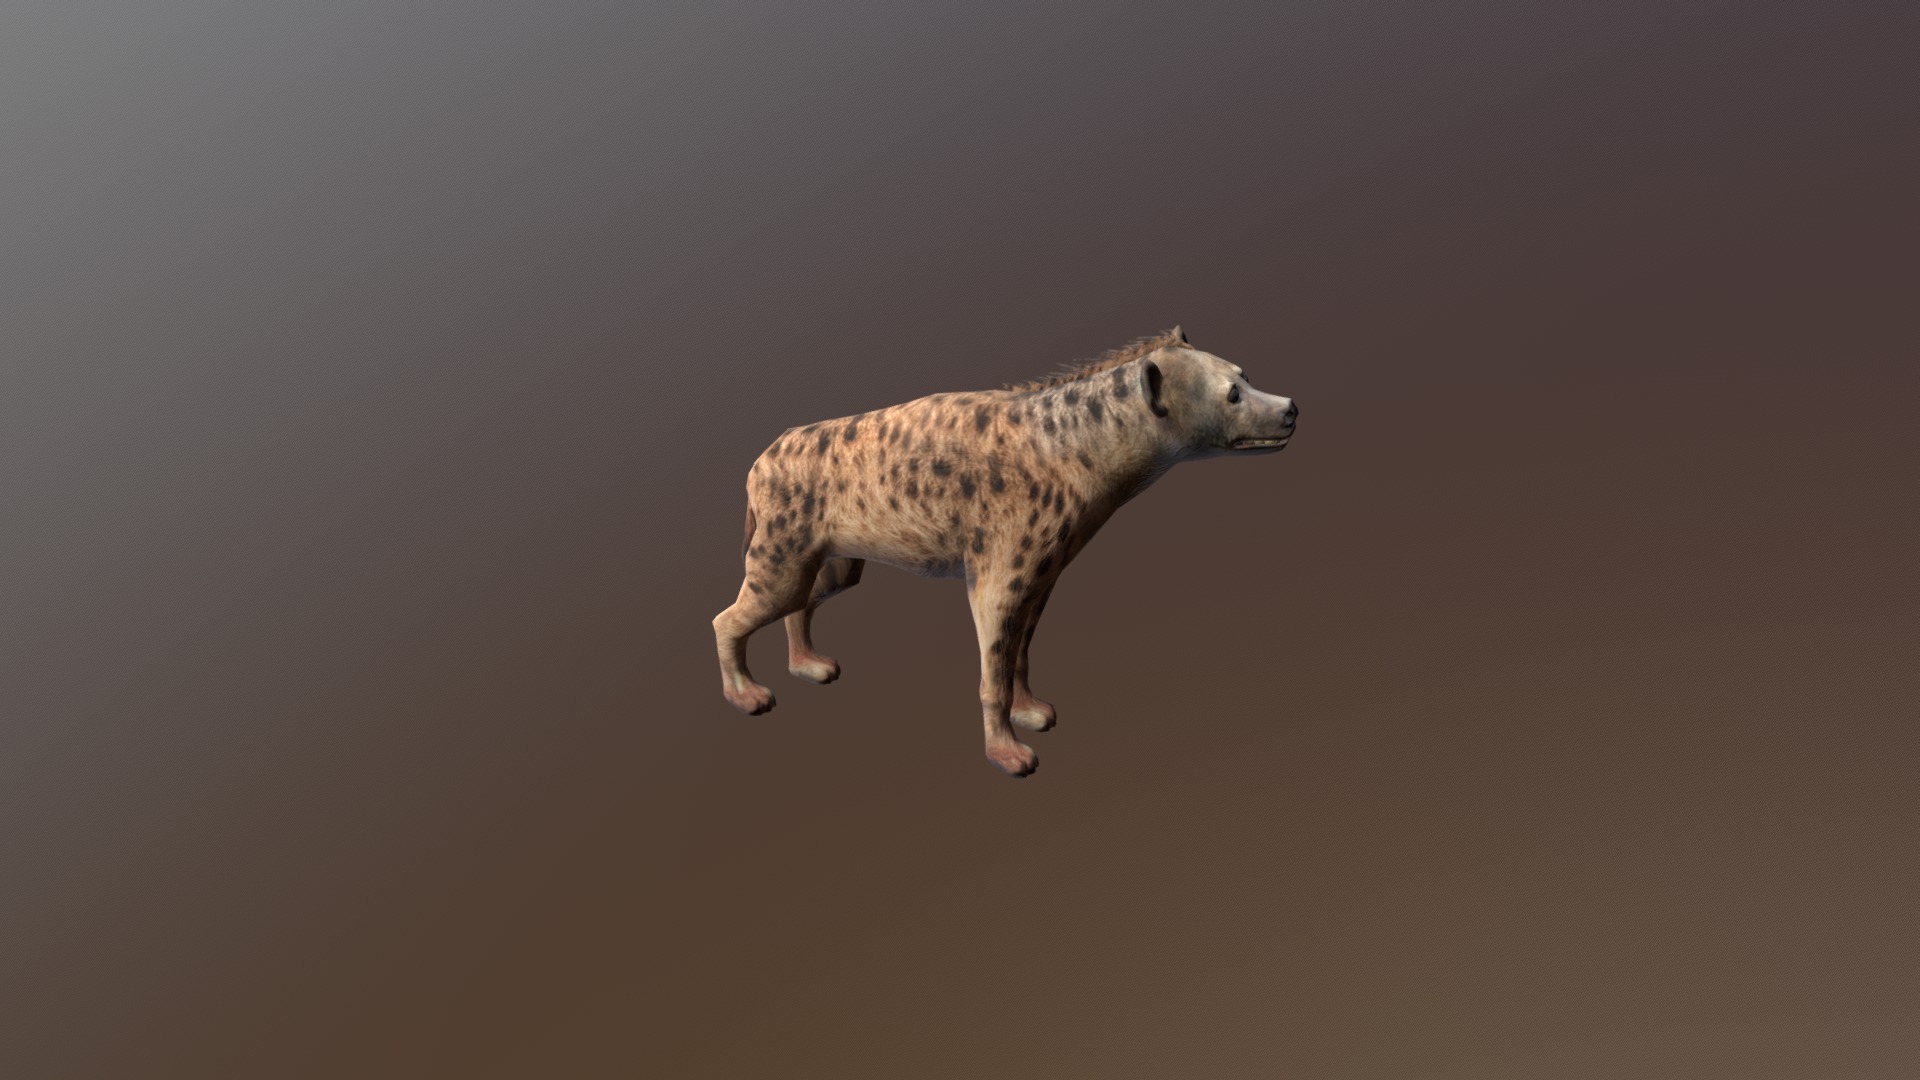 3D model African animals – Hyena - This is a 3D model of the African animals - Hyena. The 3D model is about a cheetah walking on a grey background.